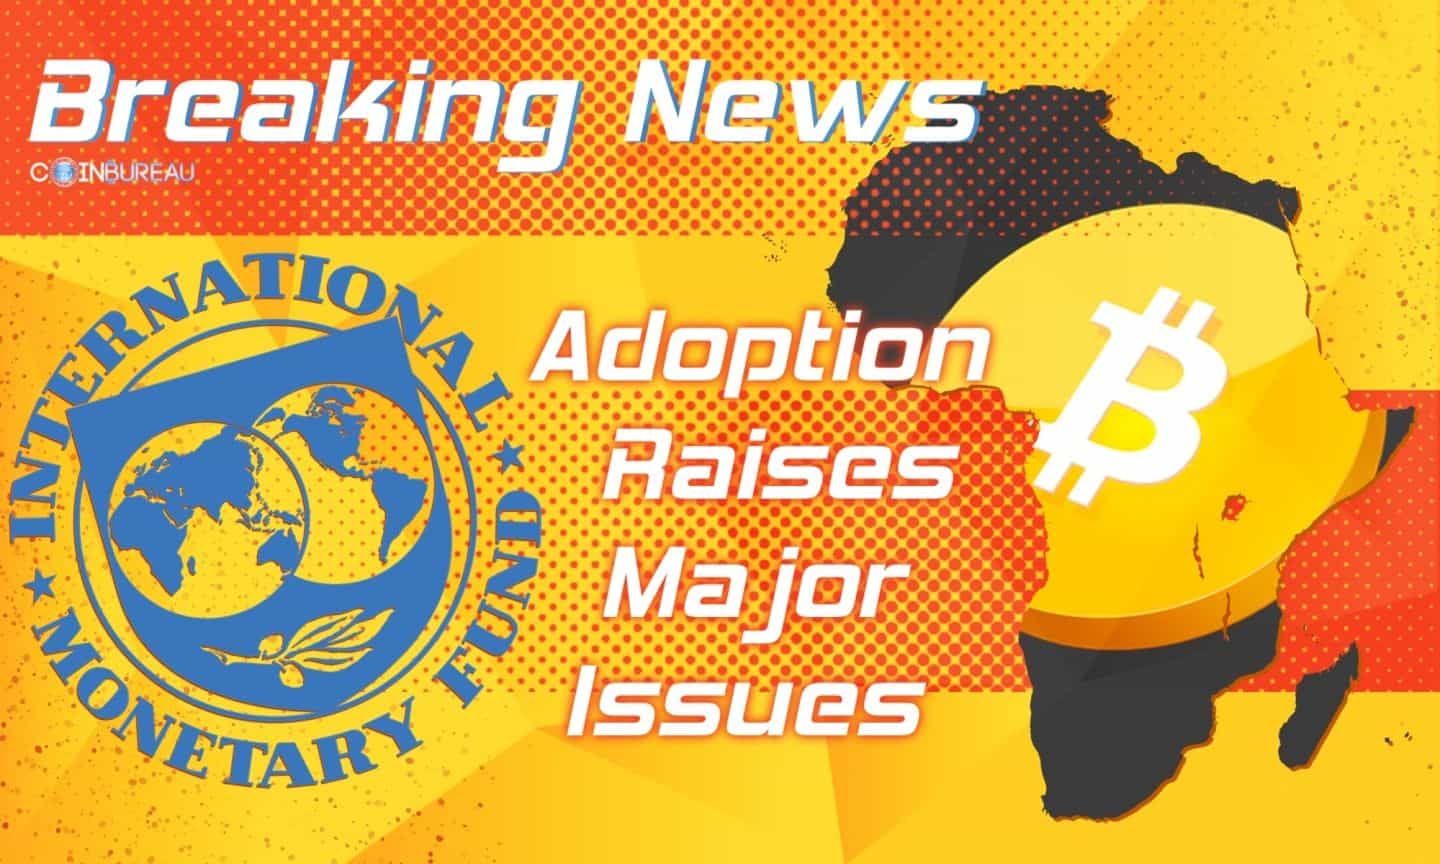 IMF Says Bitcoin Adoption In Central Africa Raises Major Issues: Report